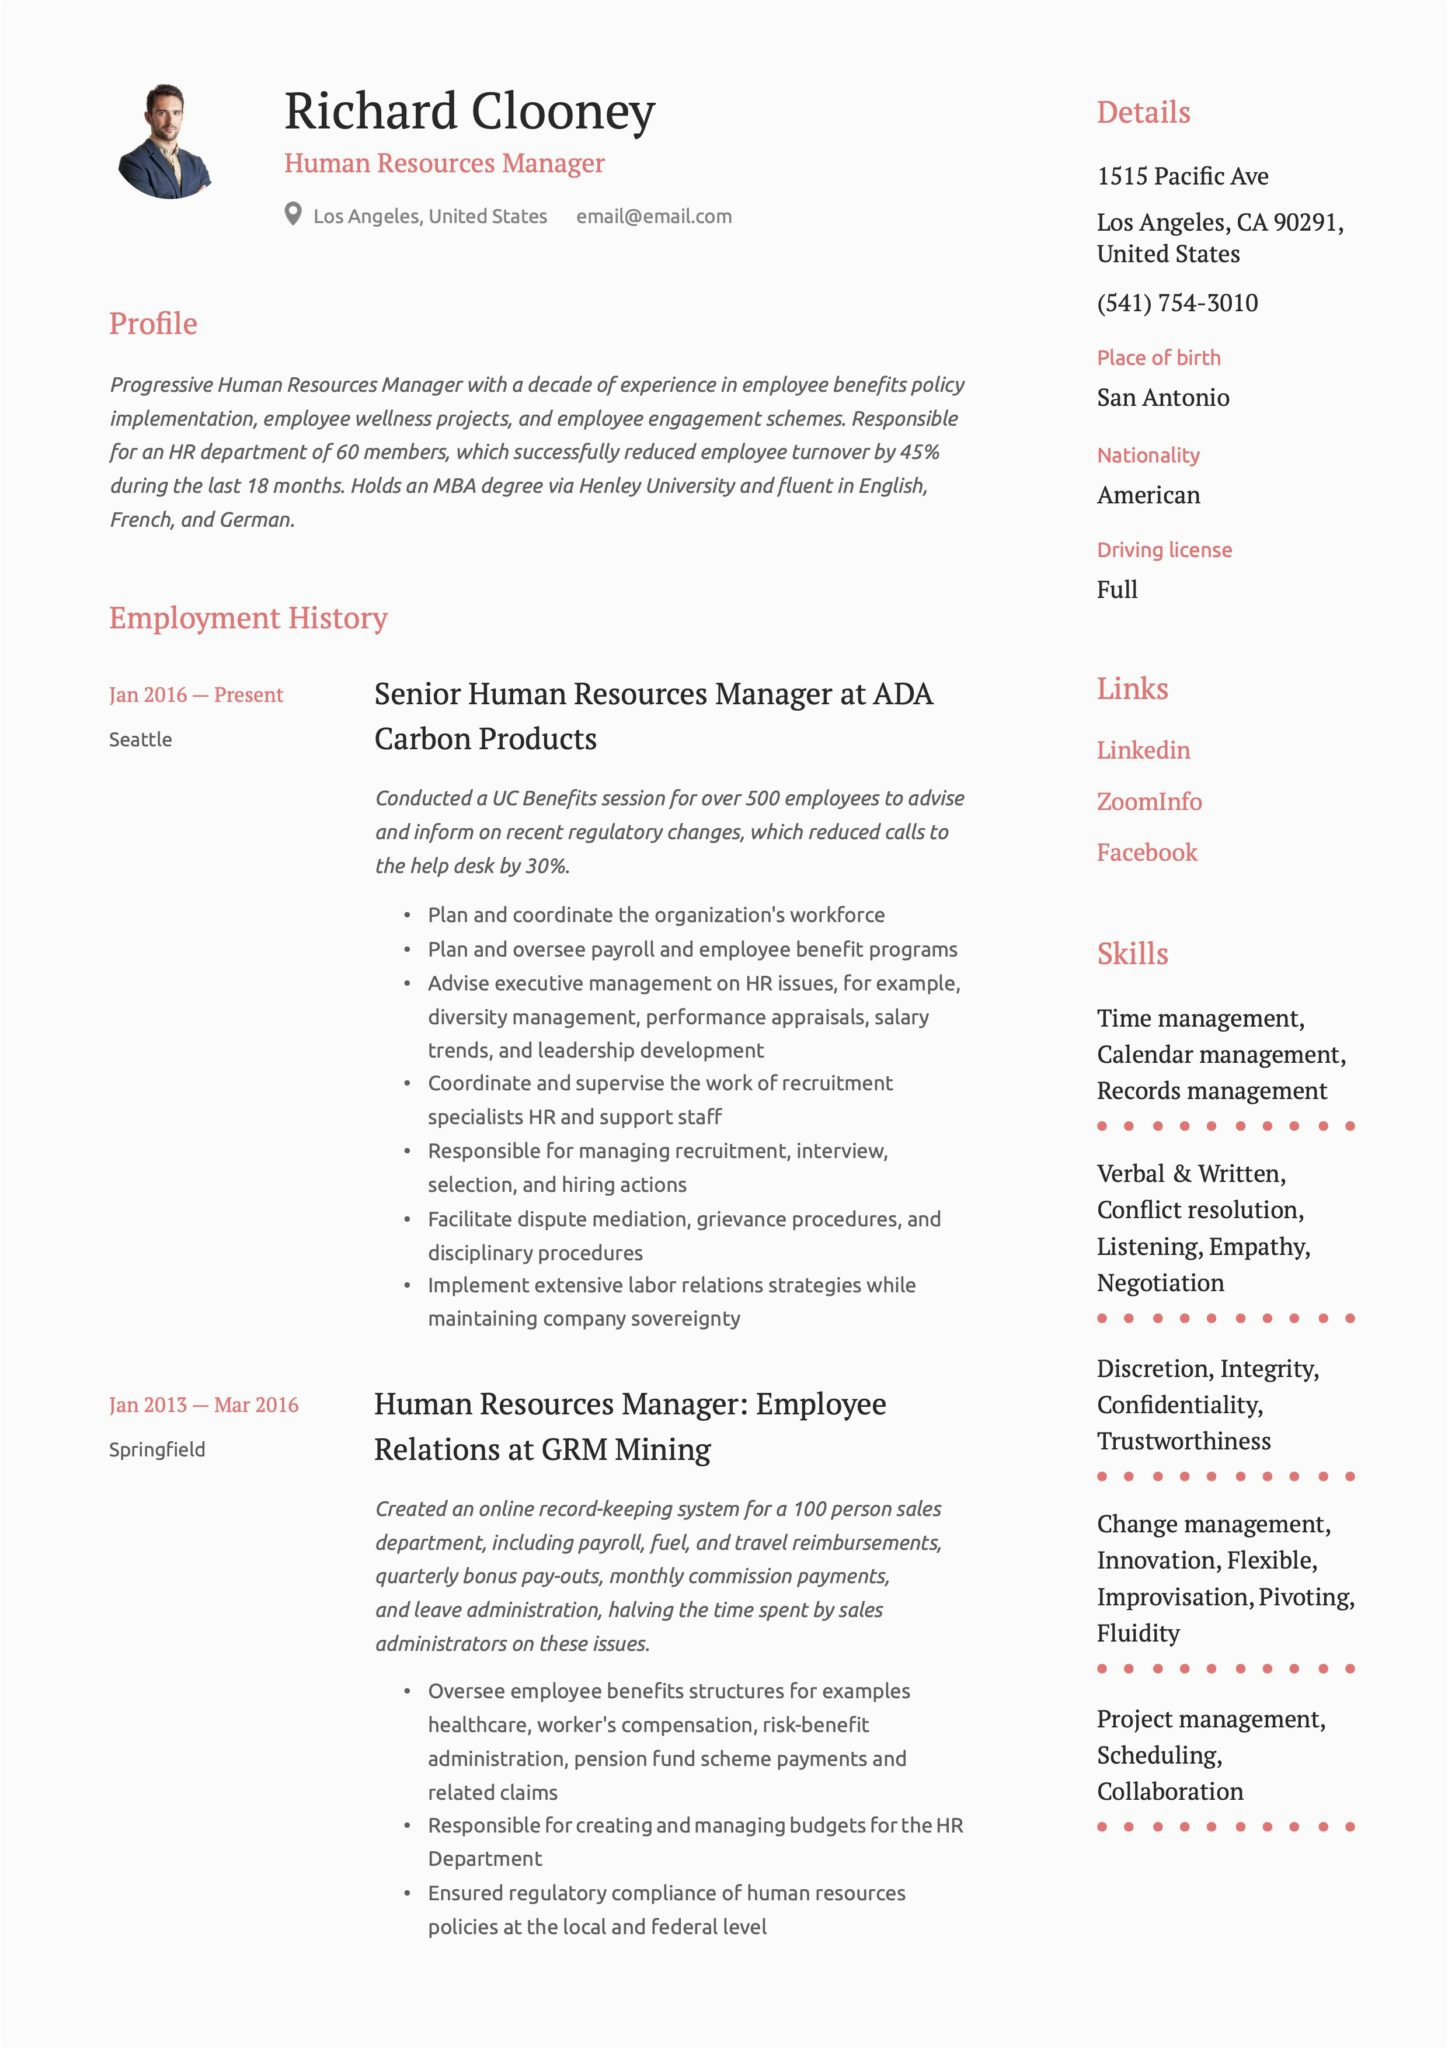 Sample Resume Of An Human Resource Manager 17 Human Resources Manager Resumes & Guide